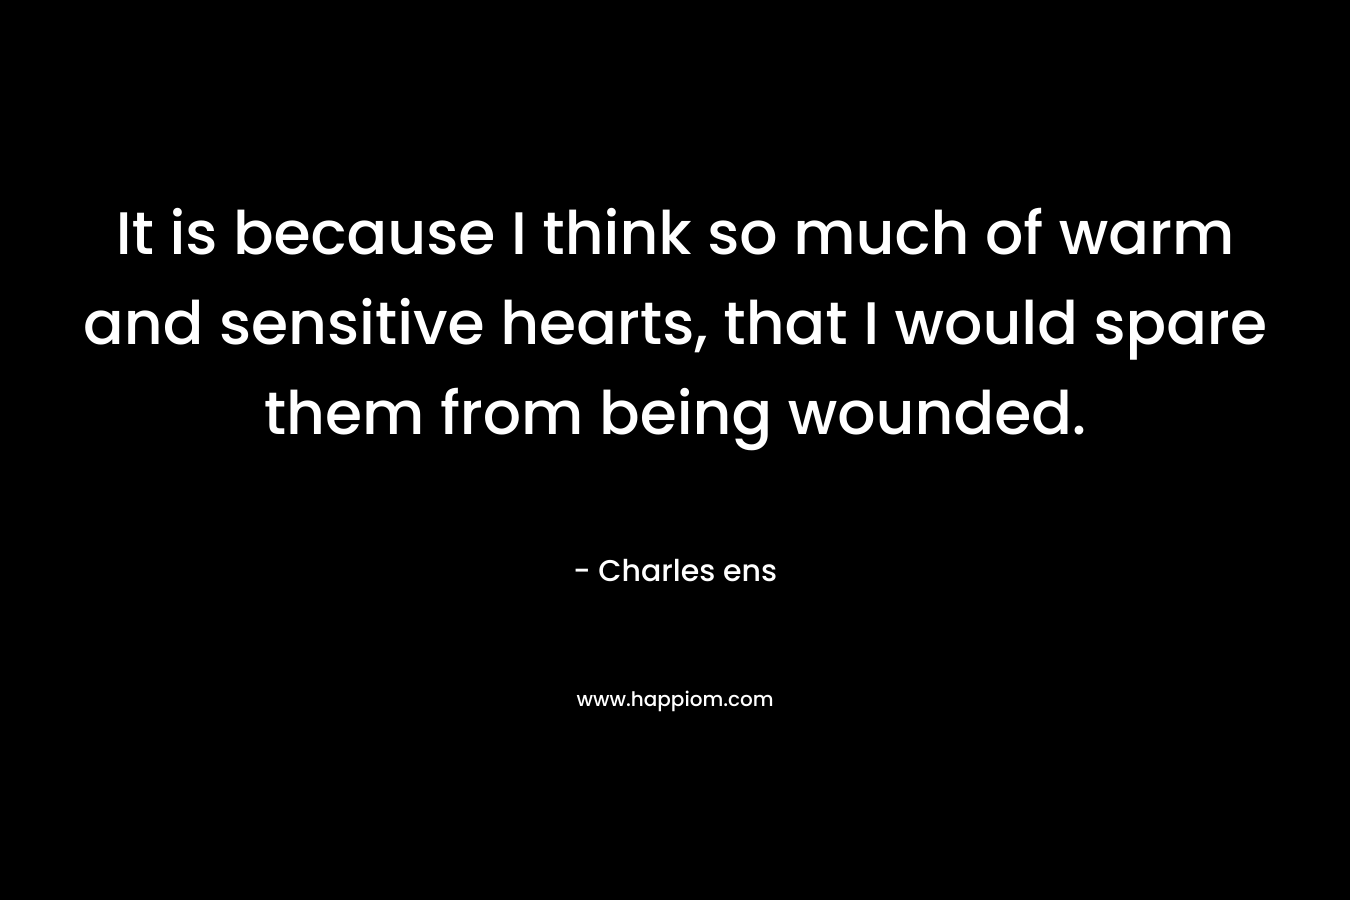 It is because I think so much of warm and sensitive hearts, that I would spare them from being wounded. – Charles ens